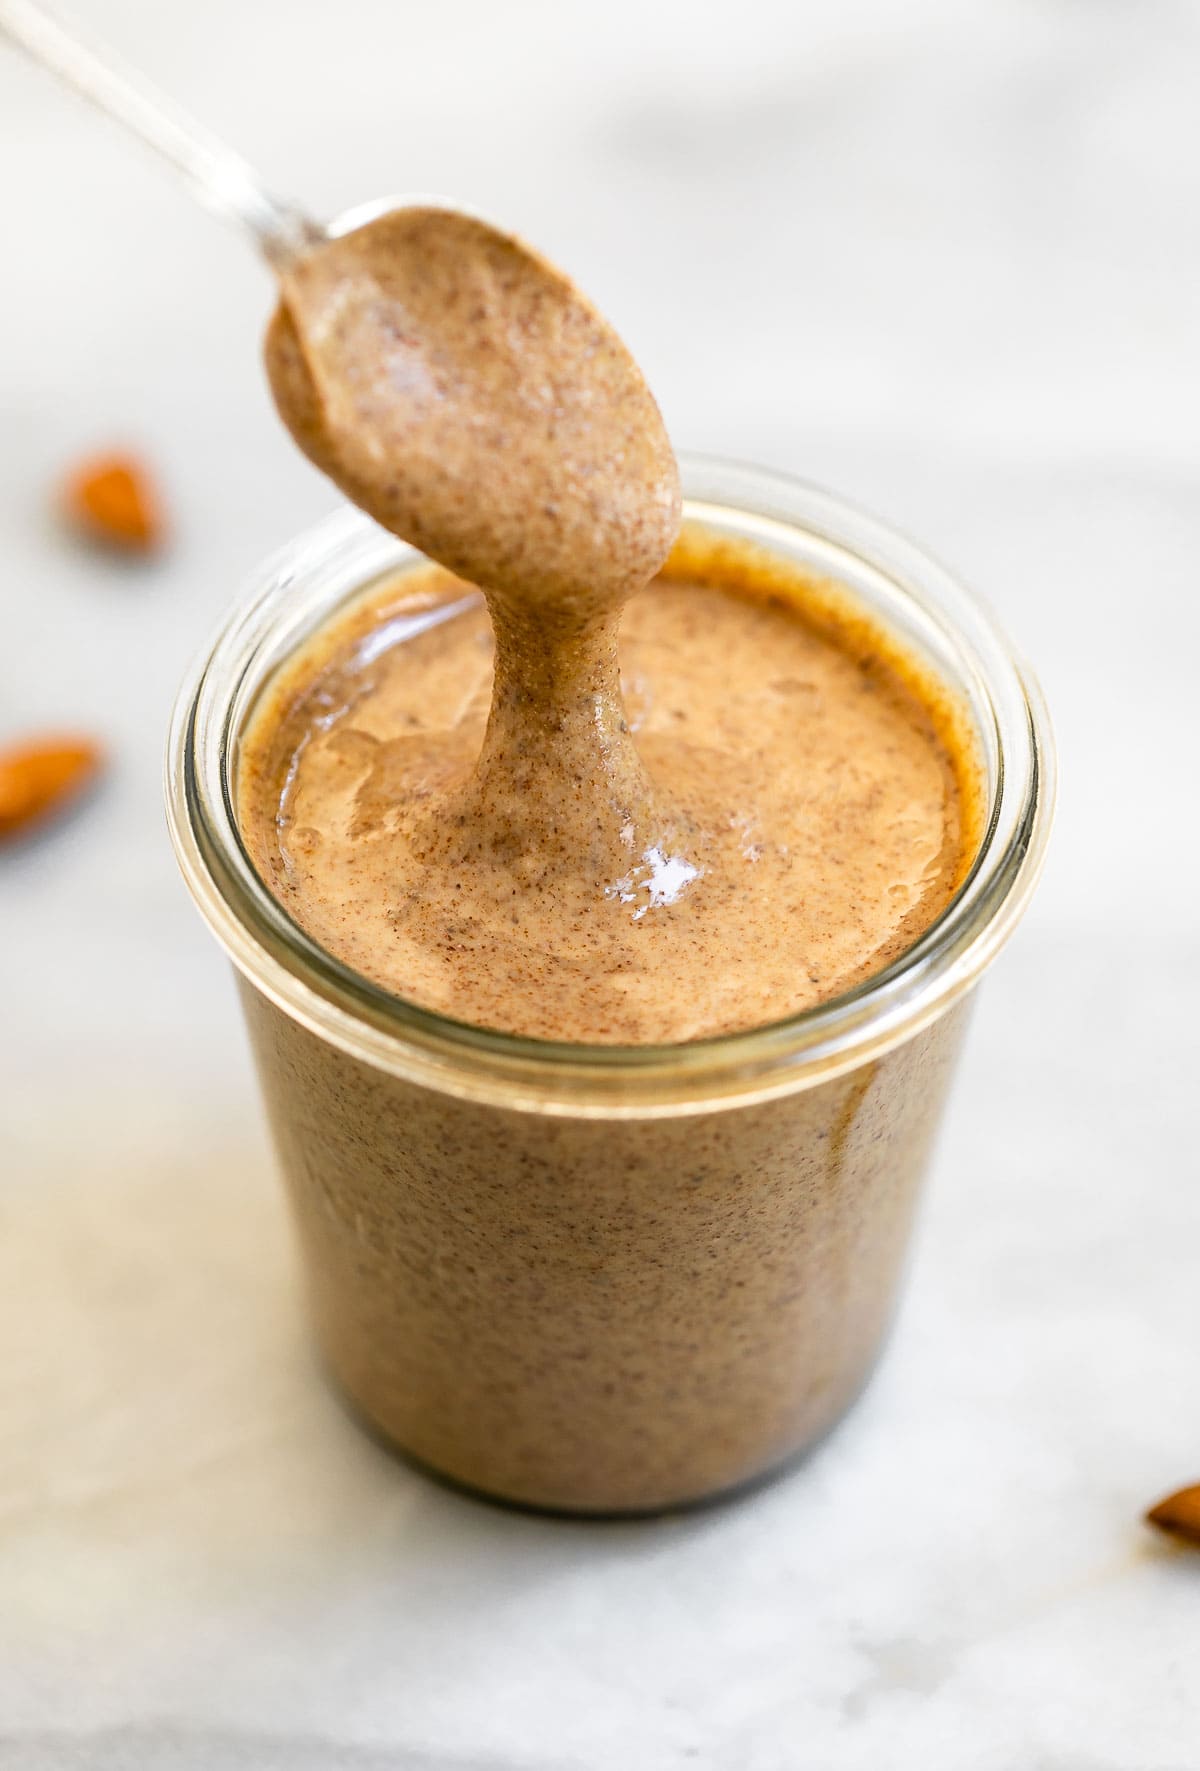 Dipping a spoon into the jar of almond butter to show the texture.